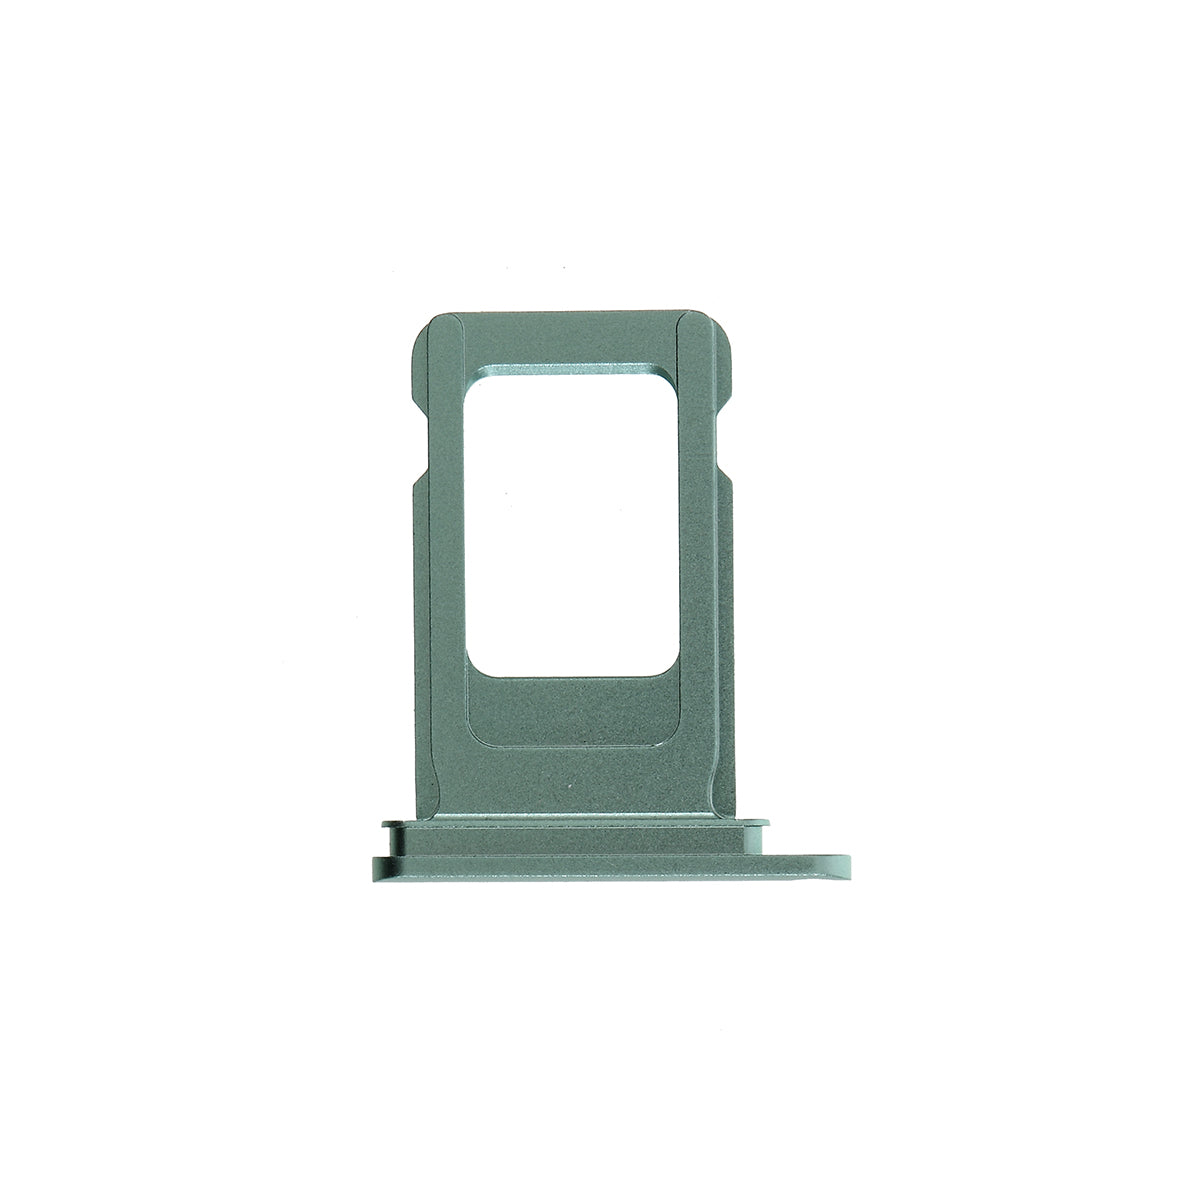 OEM SIM Card Tray Holder Replace Part for Apple iPhone 11 6.1 inch - Green